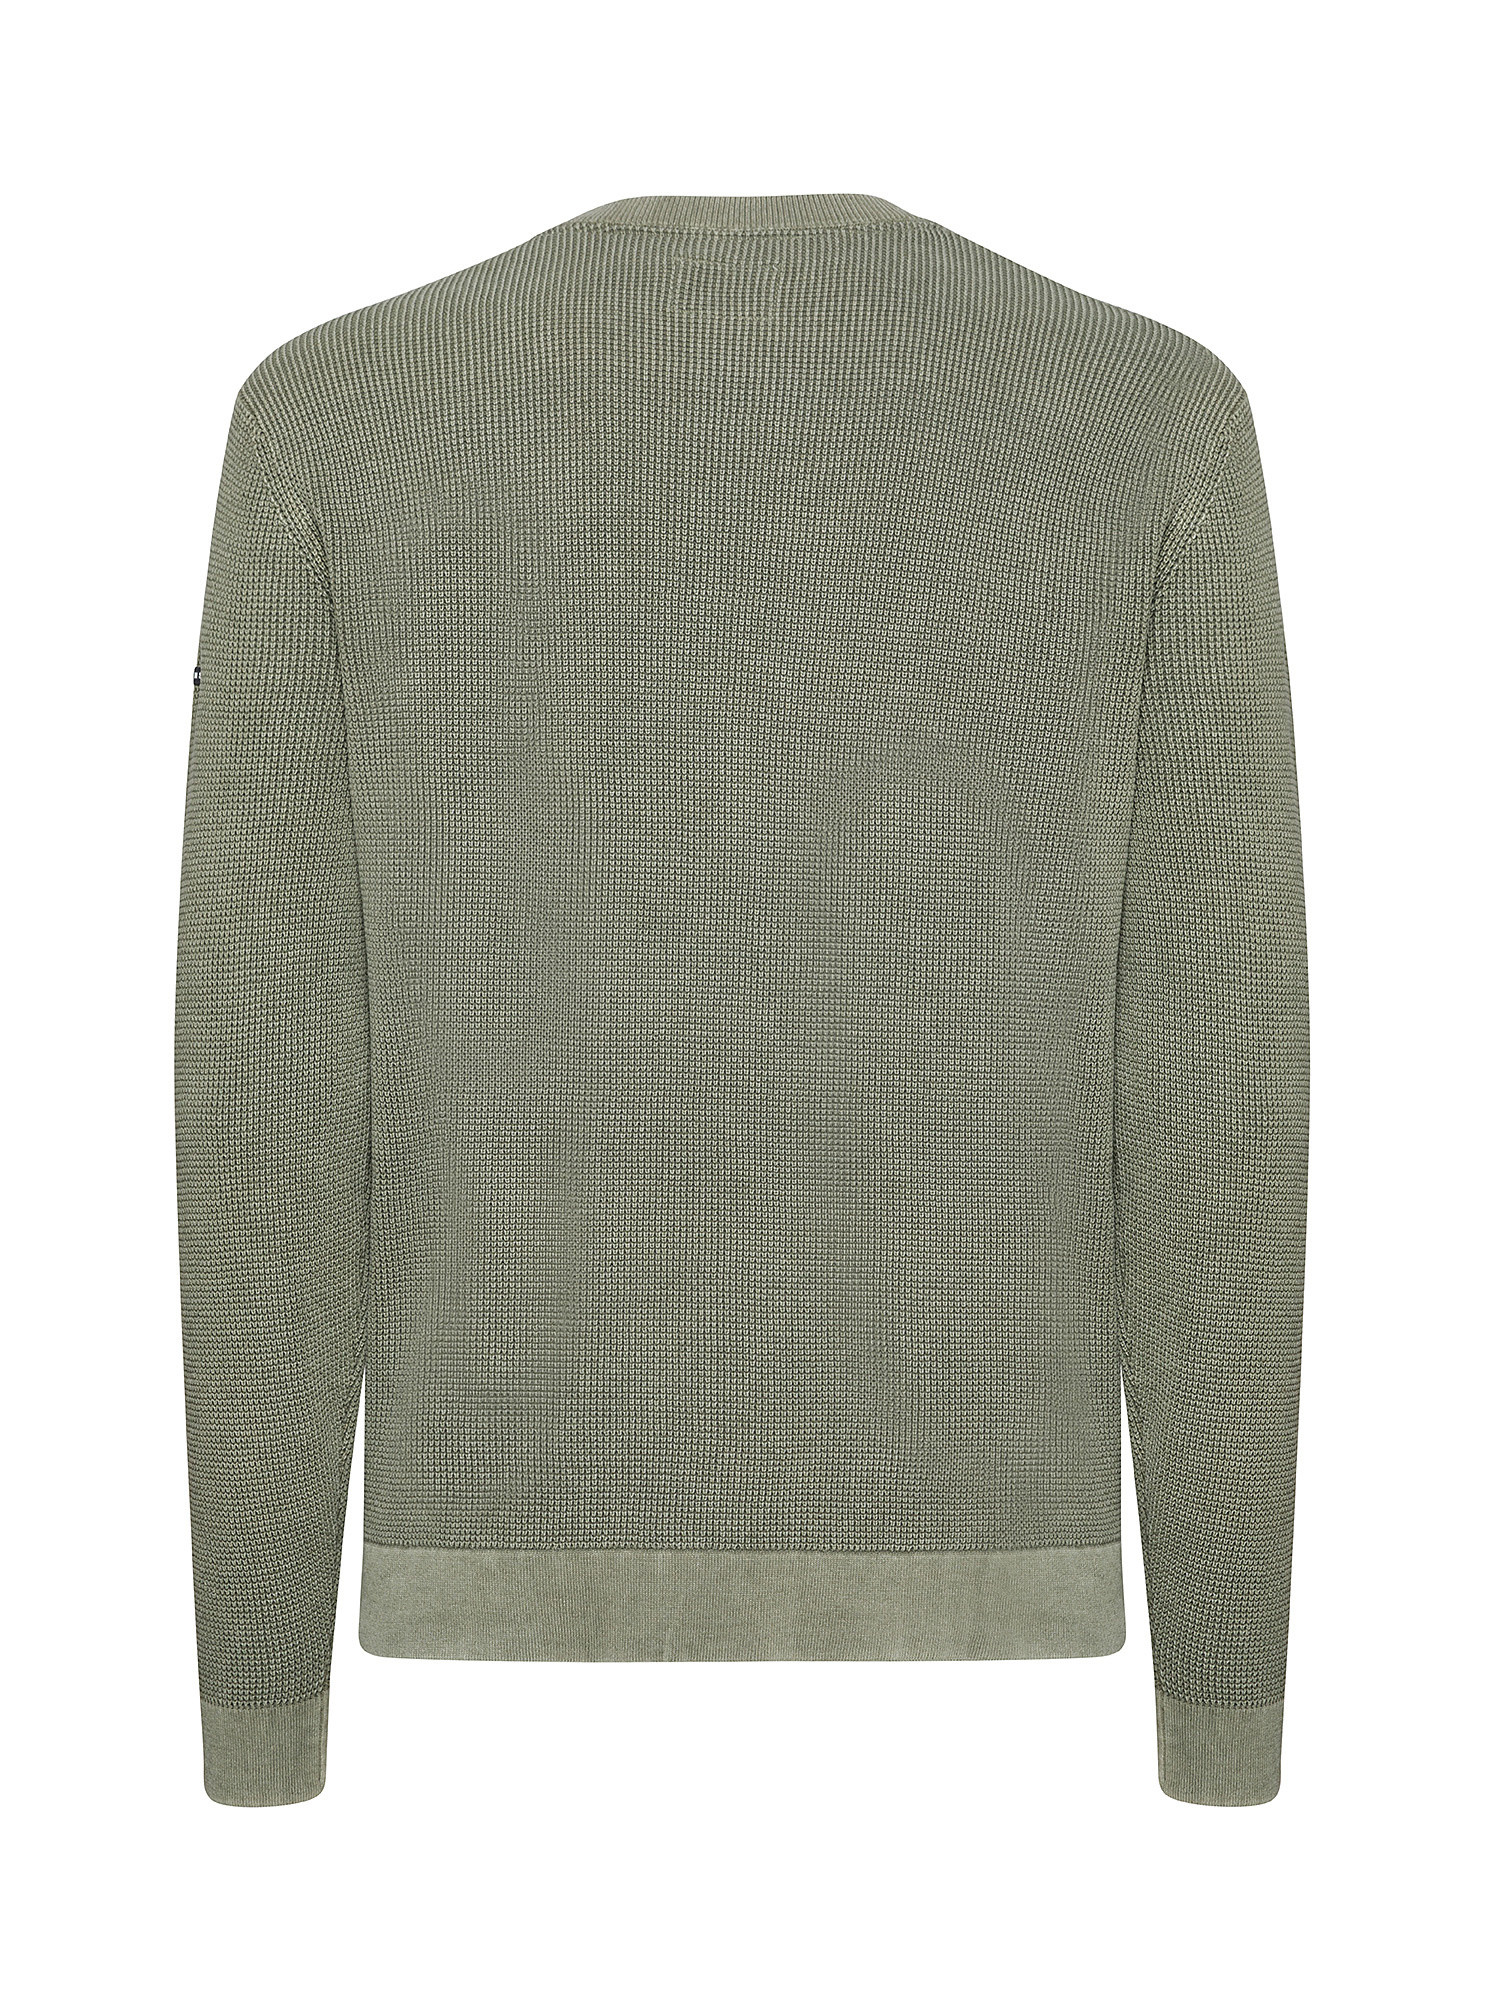 Pepe Jeans - Honeycomb sweater, Light Green, large image number 1